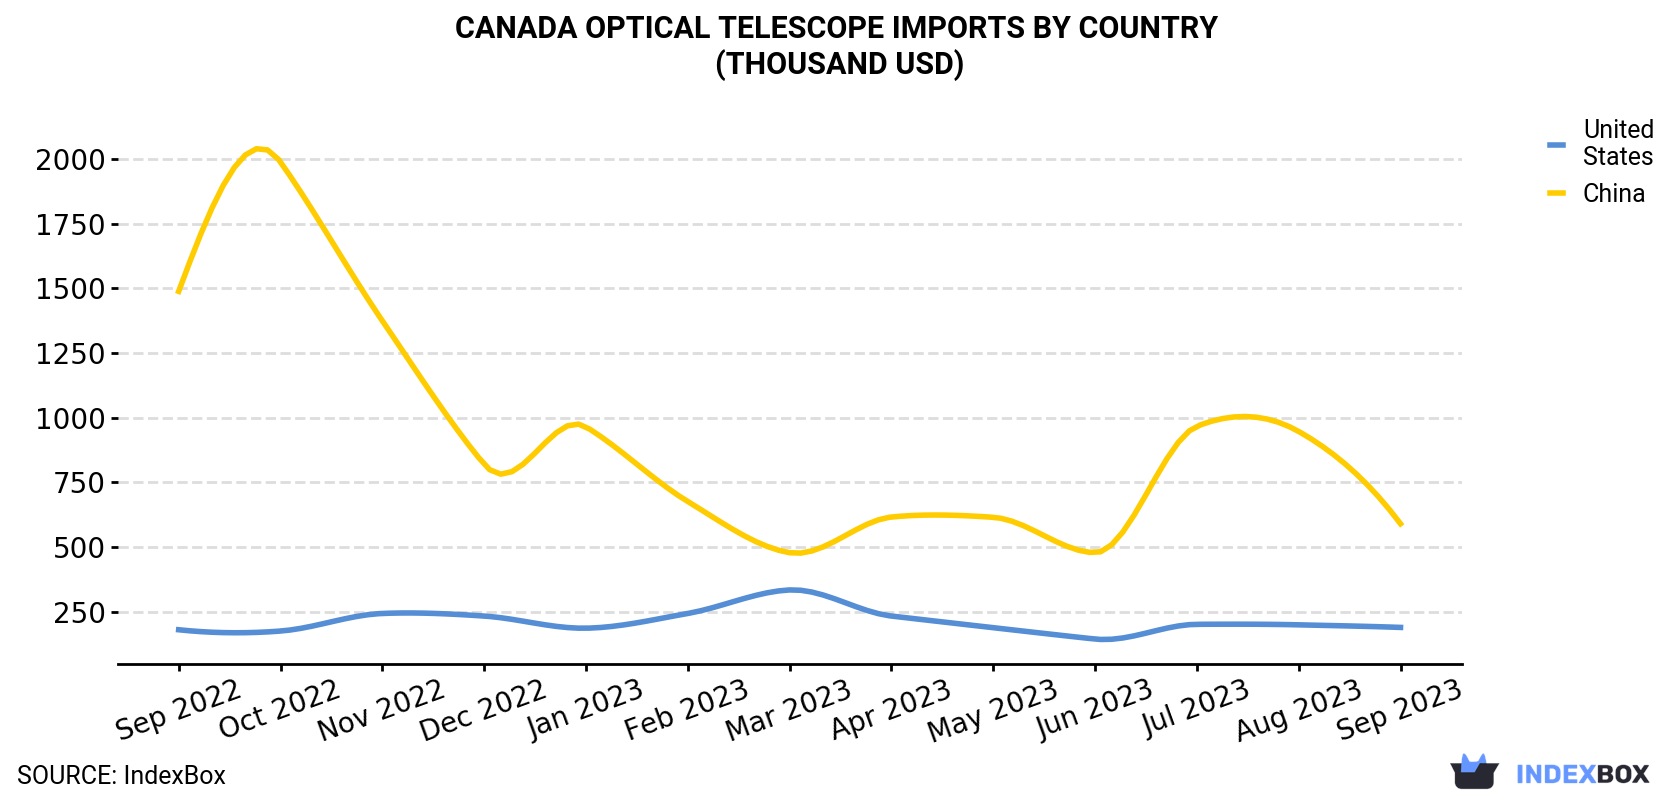 Canada Optical Telescope Imports By Country (Thousand USD)